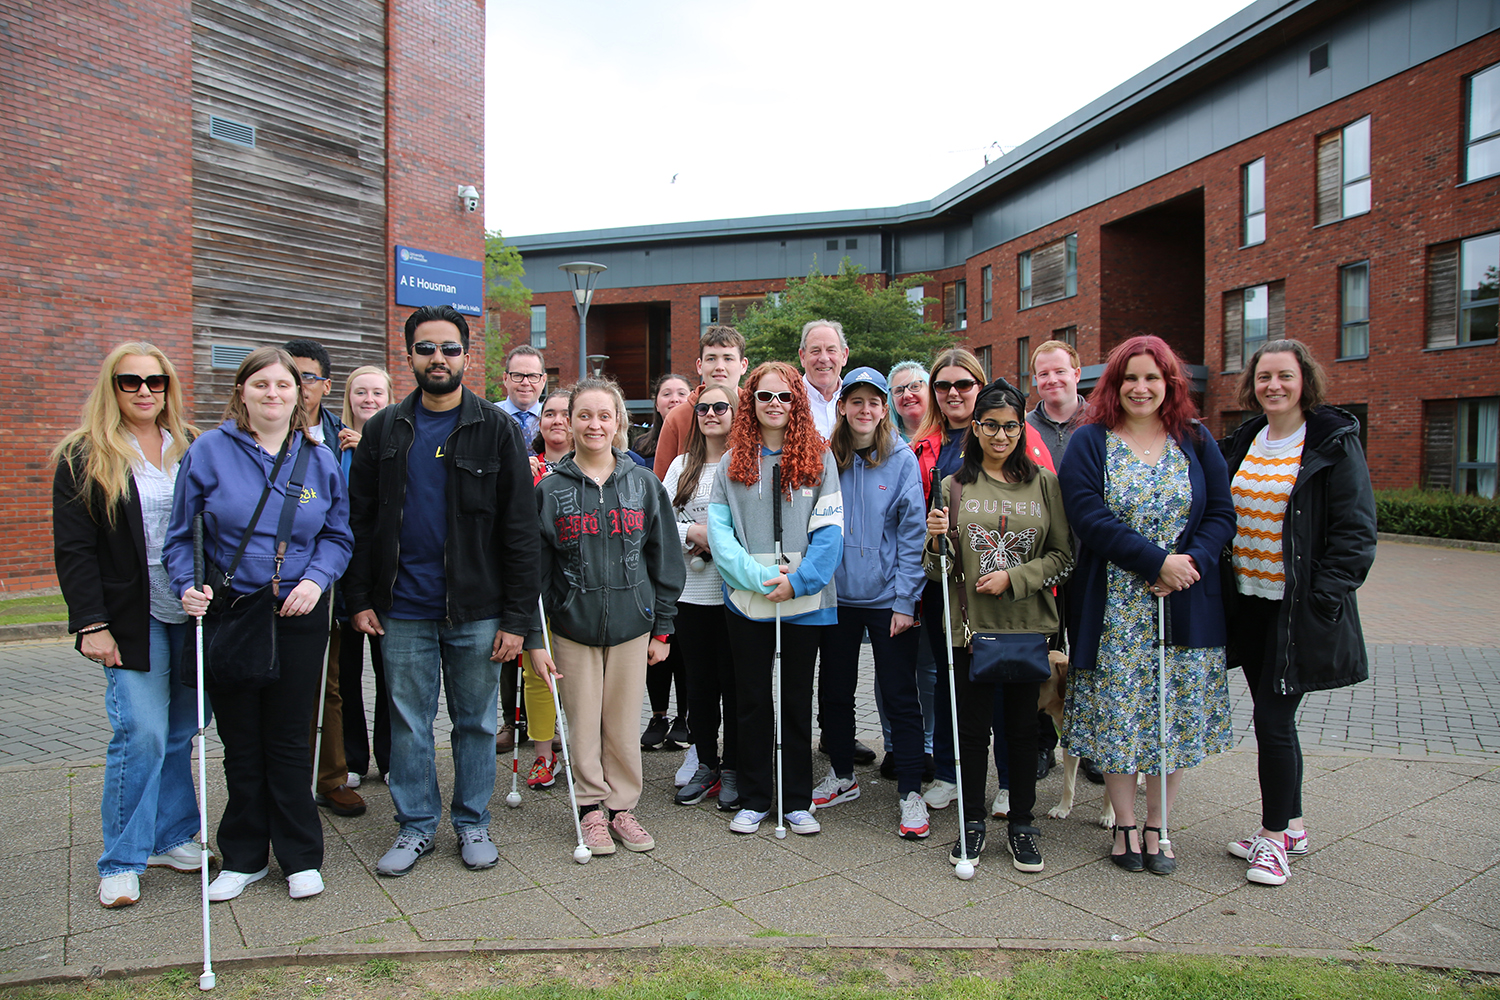 Students visit the University of Worcester to learn more about transition to higher education